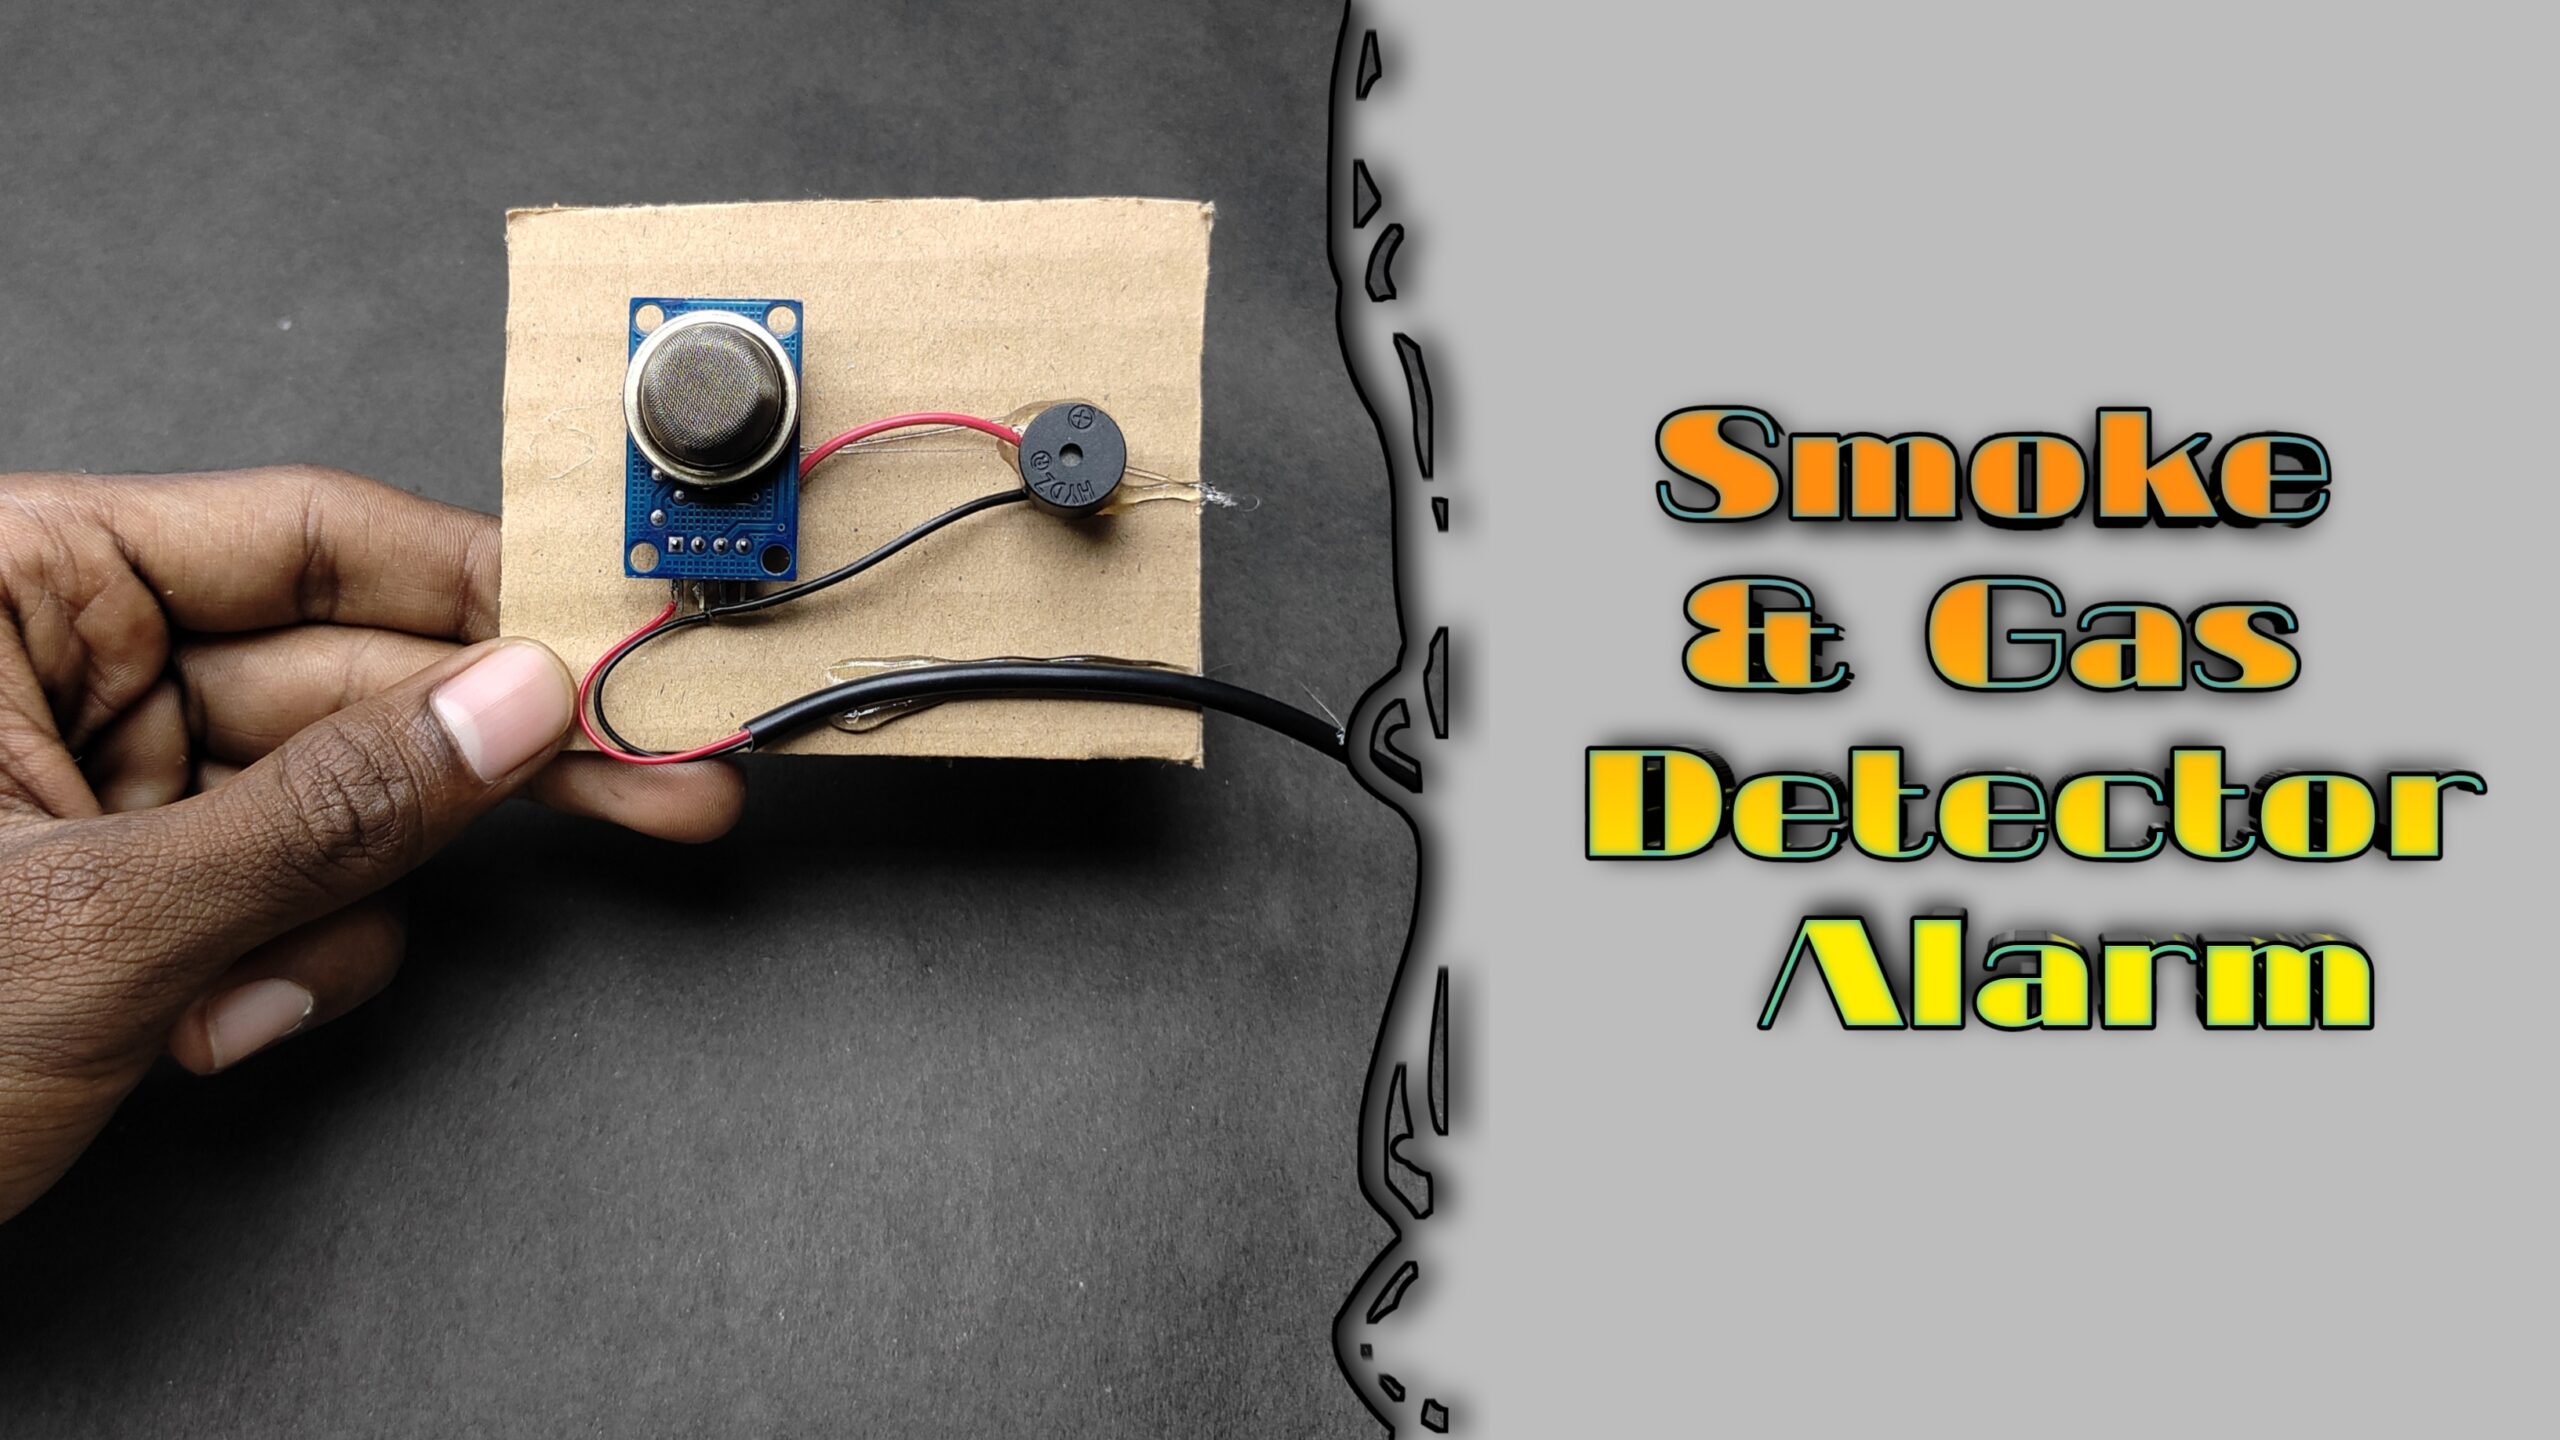 How to make gas detector alarm